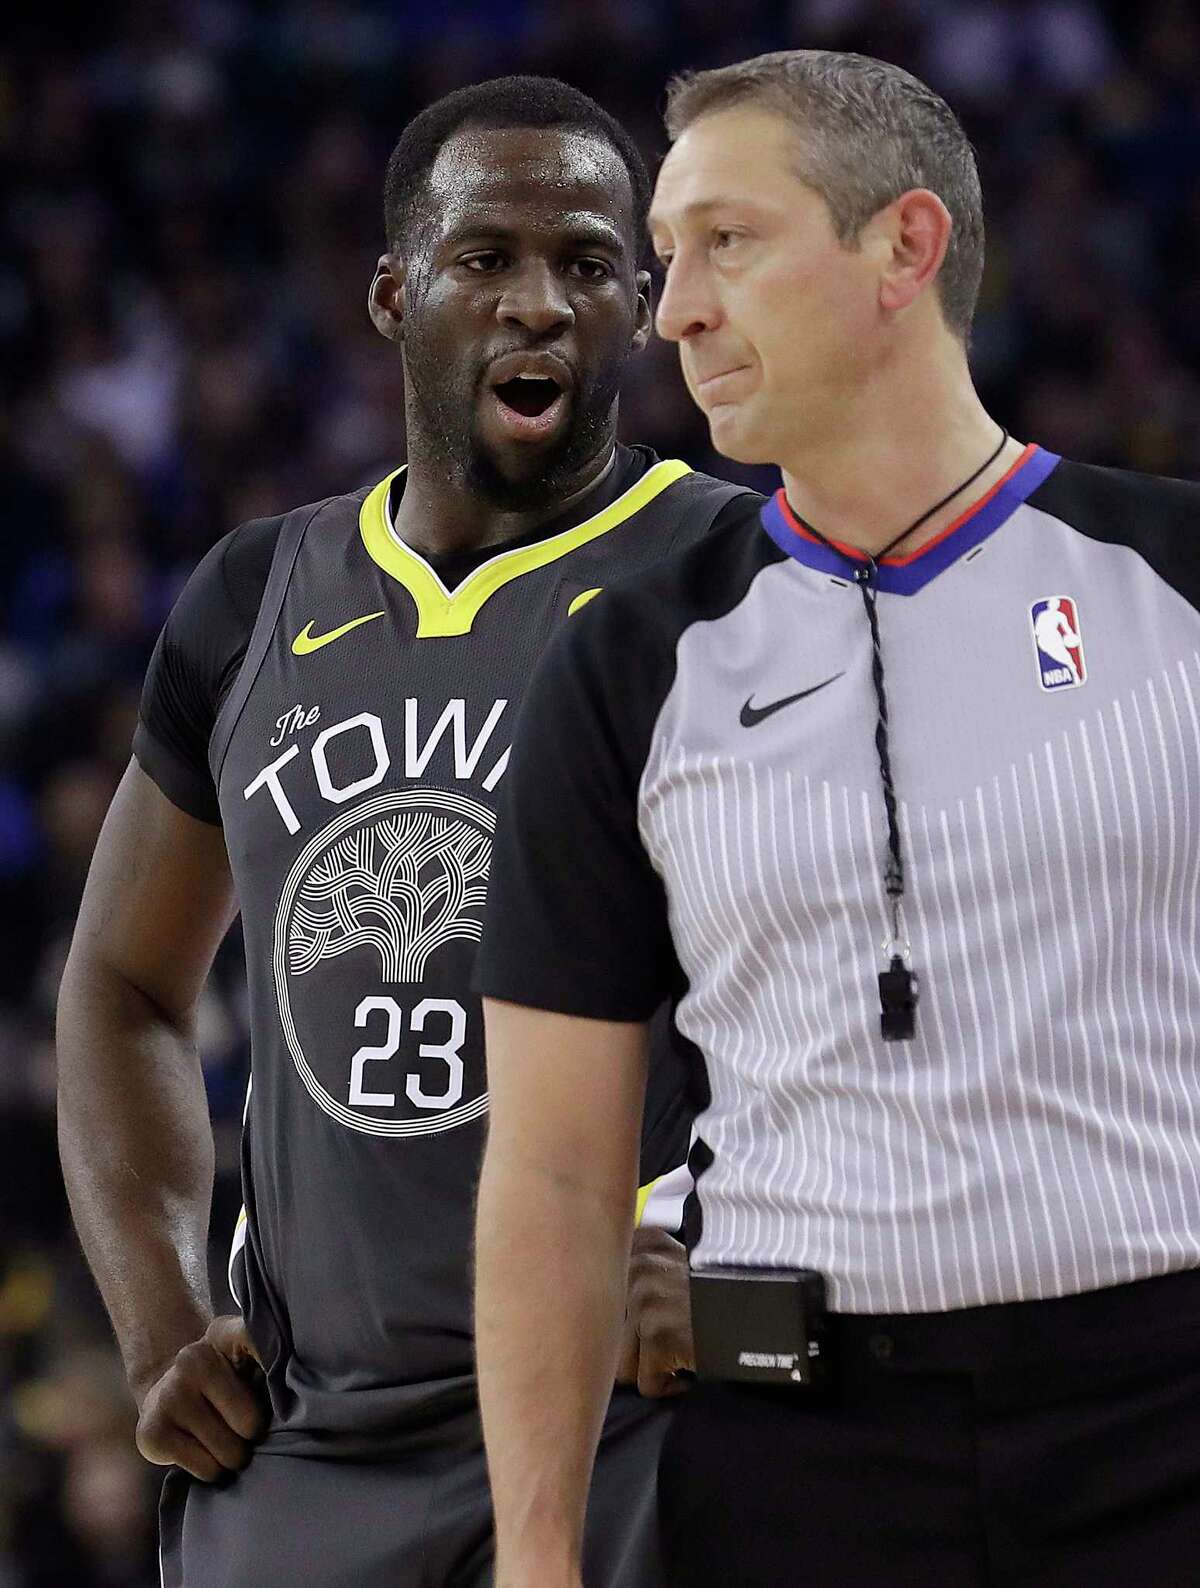 Golden State Warriors forward Draymond Green (23) questions referee J.T. Orr (72) after being called for a foul during the first half of the team's NBA basketball game against the Denver Nuggets in Oakland, Calif., Saturday, Dec. 23, 2017. (AP Photo/Jeff Chiu)